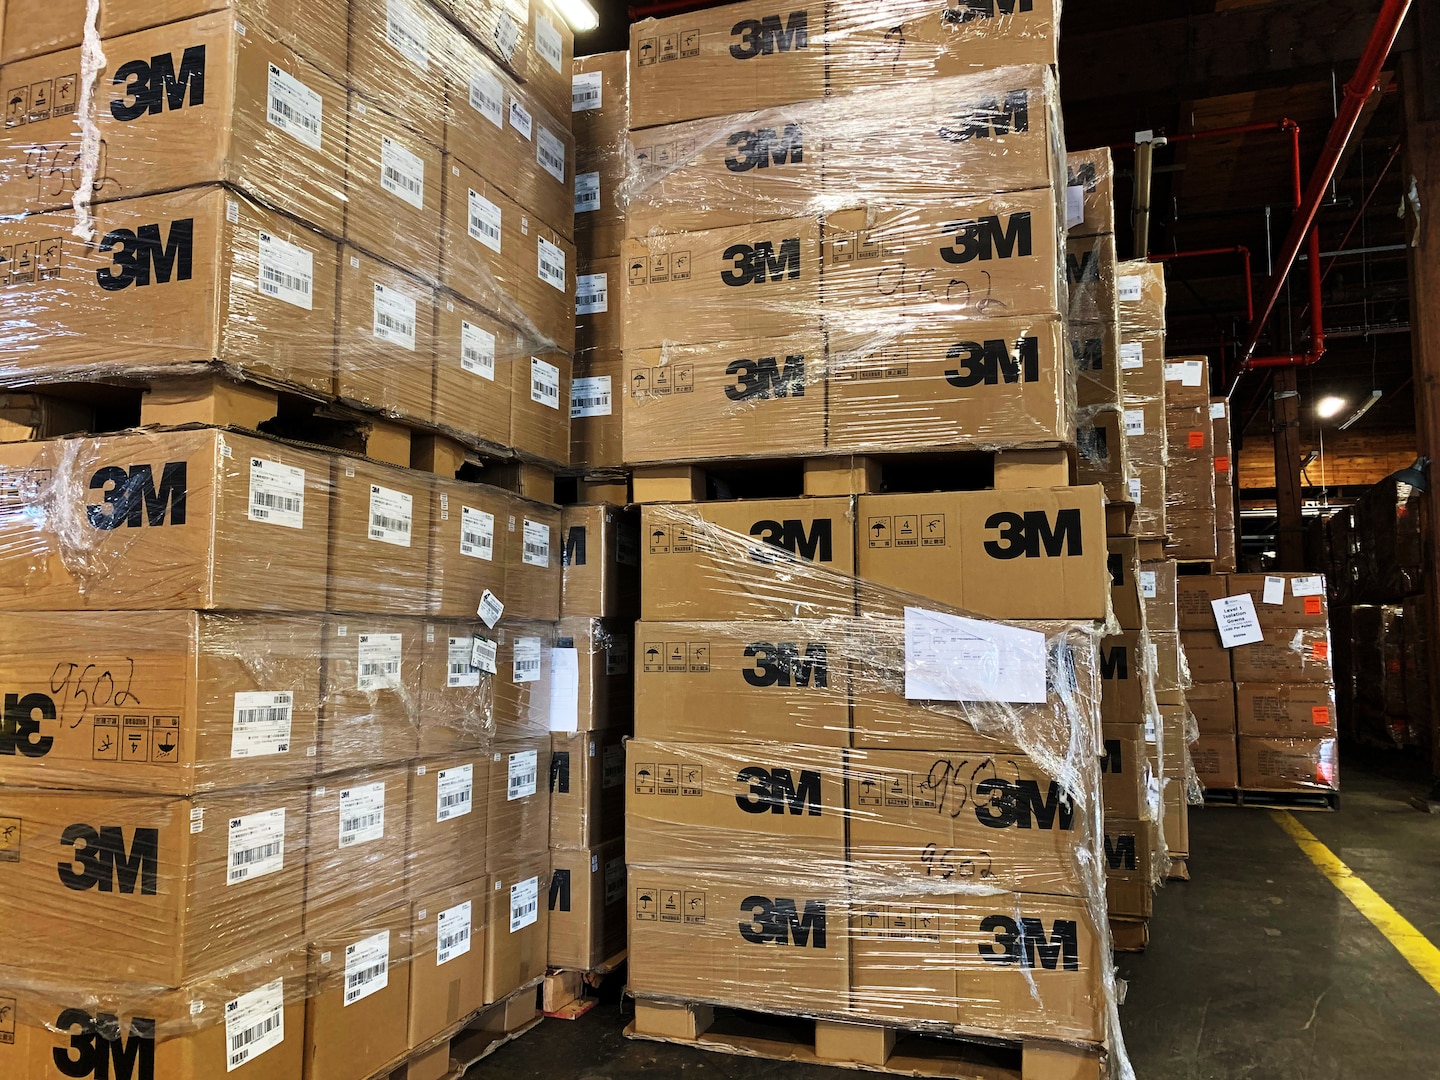 Boxes labelled 3M, shrink wrapped, and stacked on pallets in a warehouse